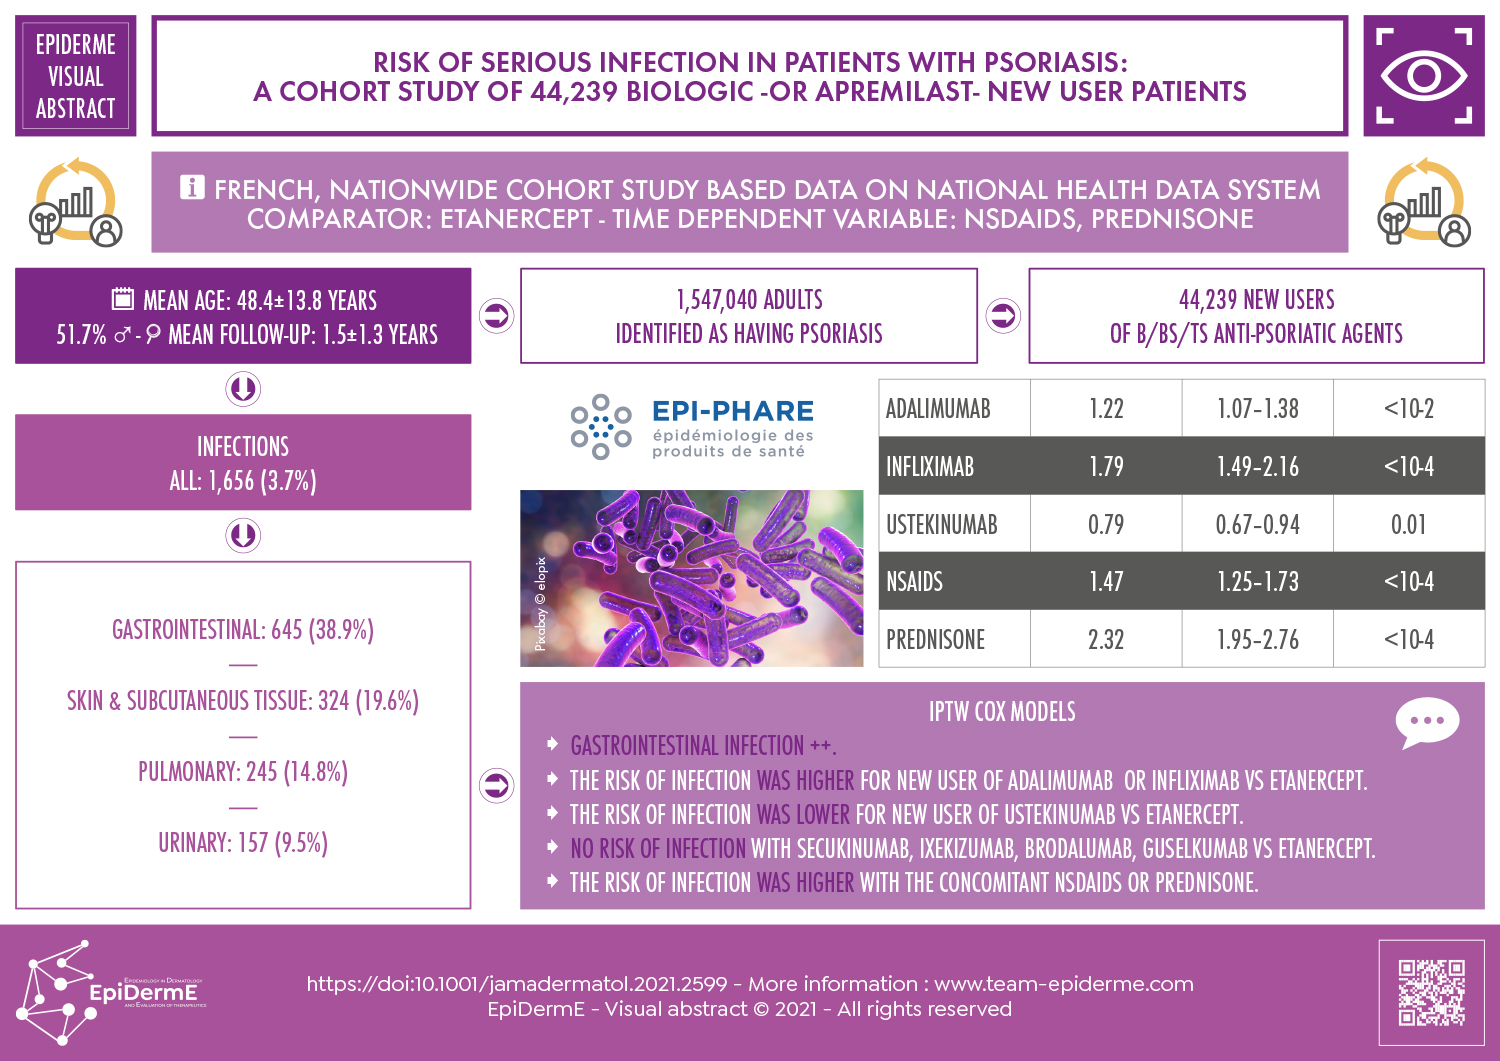 Association Between Biologics Use and Risk of Serious Infection in Patients With Psoriasis